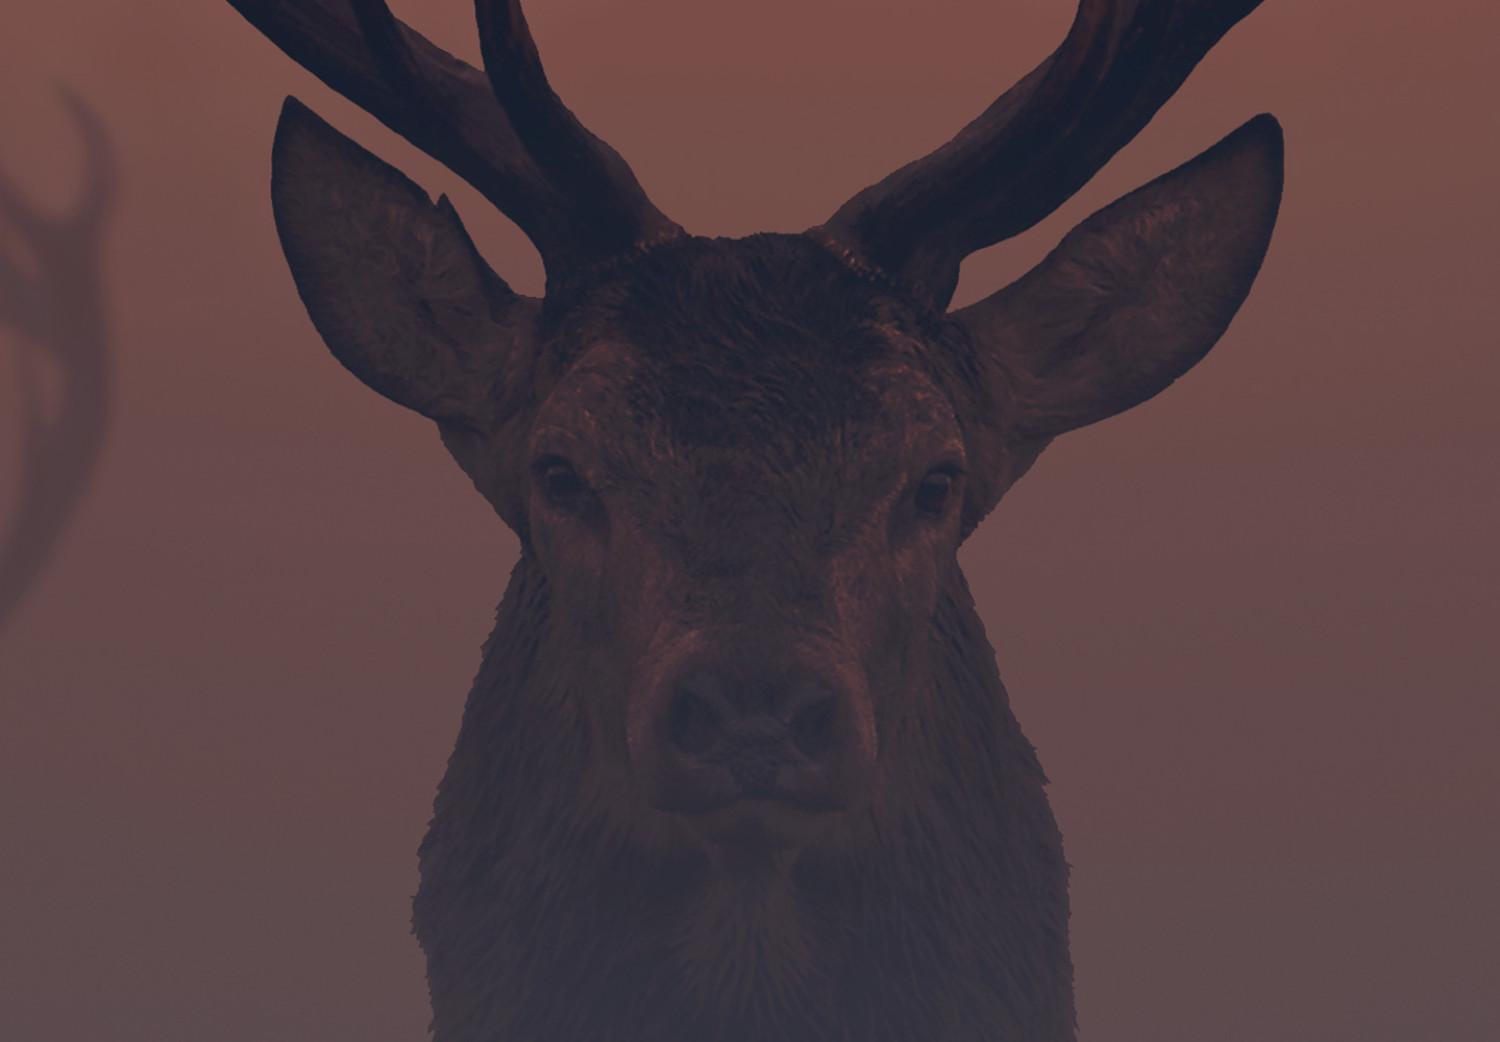 Canvas Deer in the Mist (1-piece) Vertical - animal at sunset